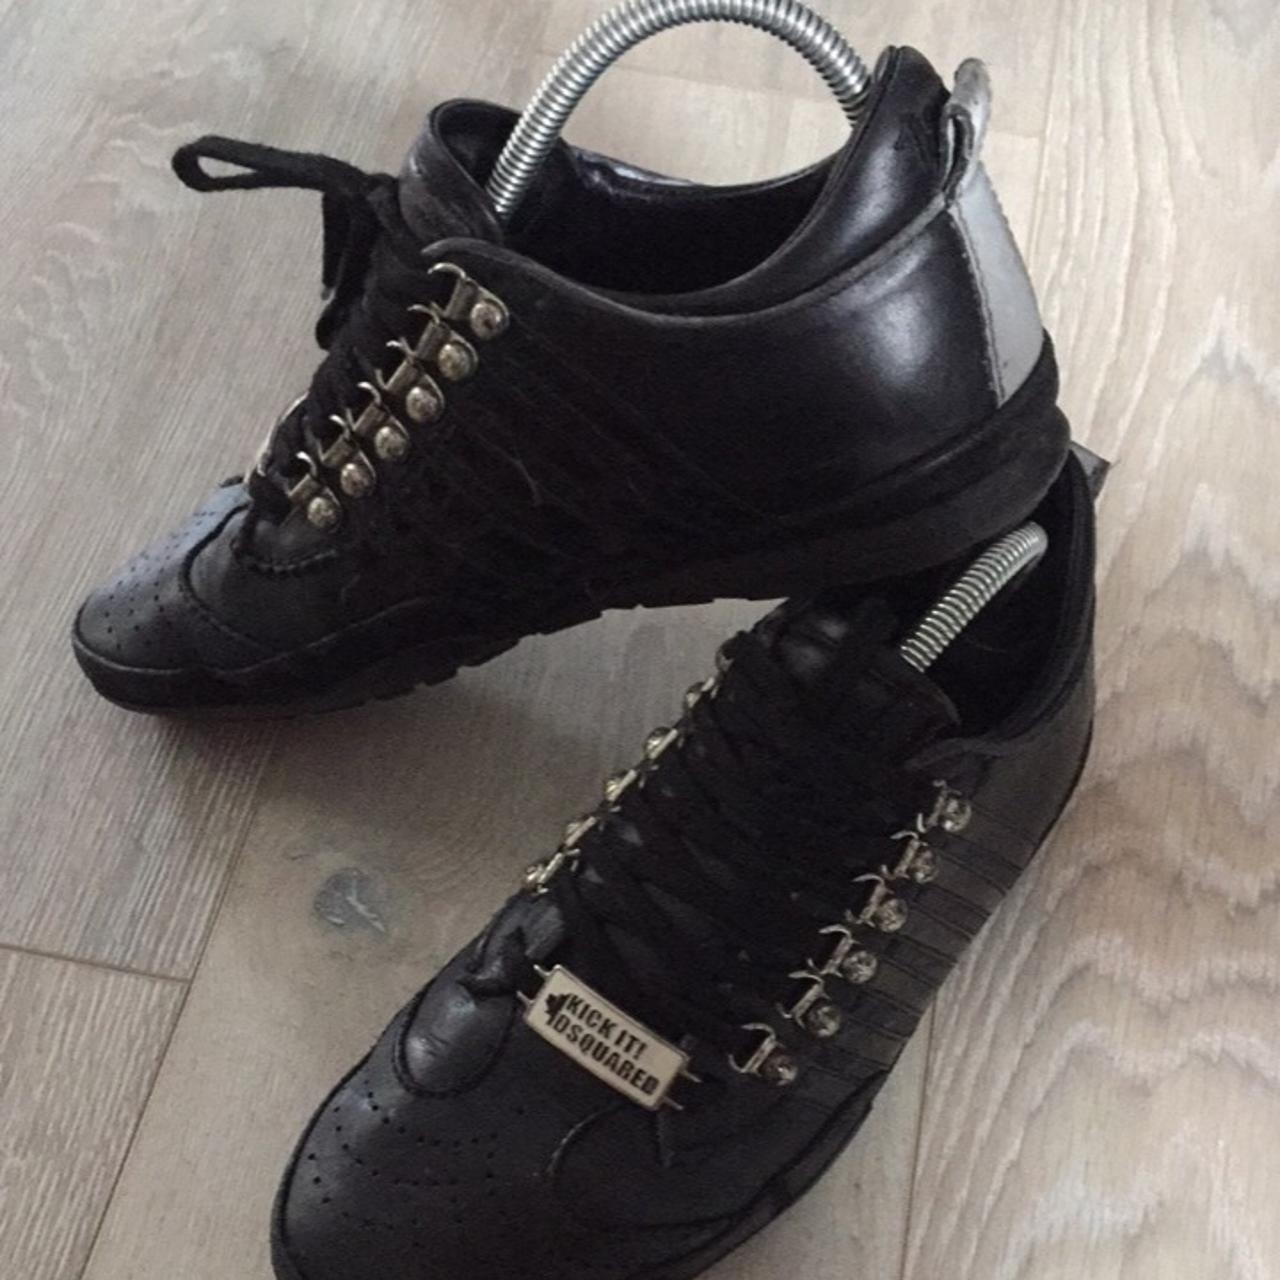 Black leather Dsquared Trainers Size 39/5 can fit up... - Depop